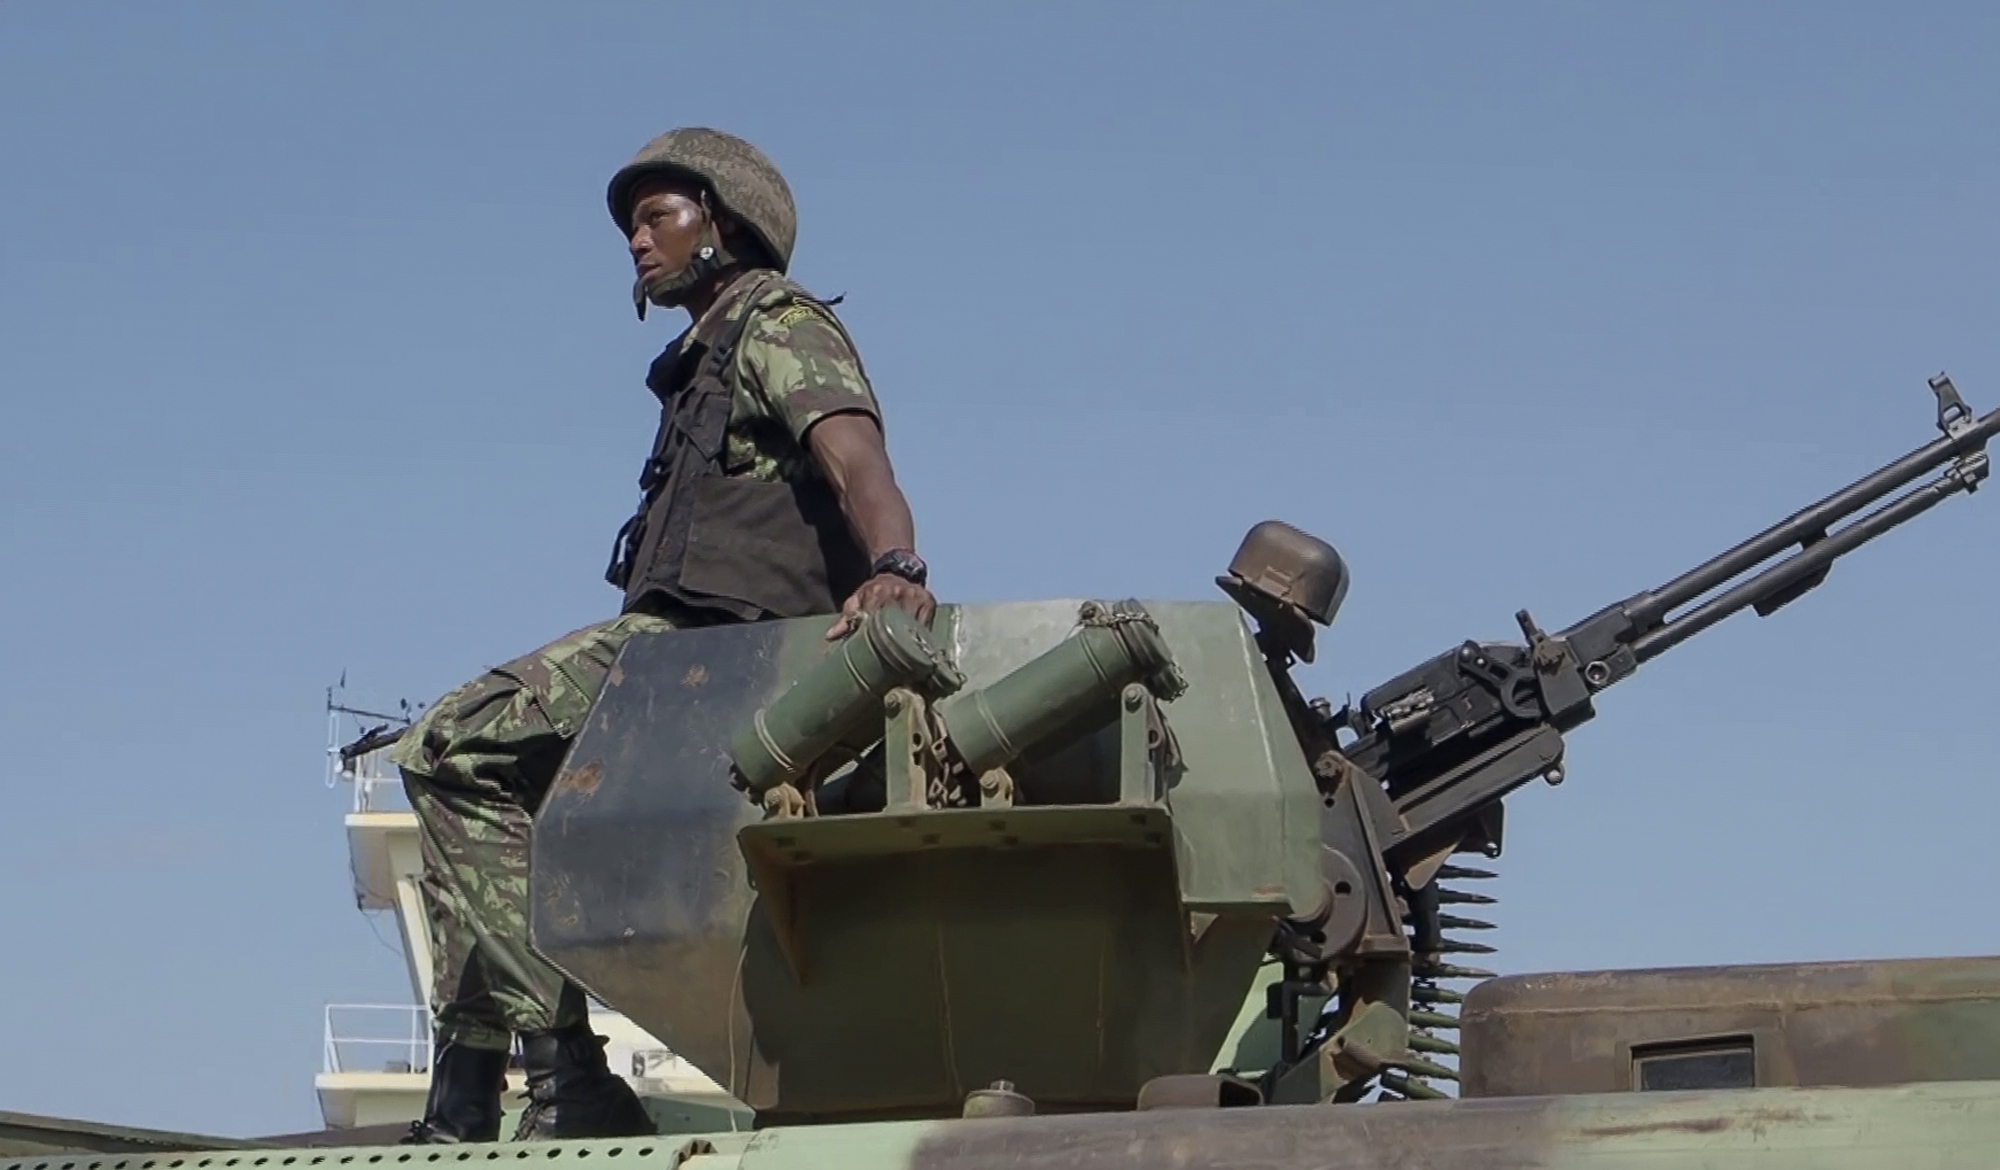 FILE - In this image made from video, a Mozambican soldier rides on an armored vehicle at the airport in Mocimboa da Praia, Cabo Delgado province, Mozambique, Aug. 9, 2021. Aid agencies and local authorities say a surge of new attacks by an Islamic State-affiliated group in northern Mozambique has left more than 70 children missing and caused 100,000 people to flee their homes. There are fears the children may have drowned in a river or been kidnapped by militants, the aids groups said in a report on Wednesday March 6, 2024. (AP Photo/Marc Hoogsteyns, File)